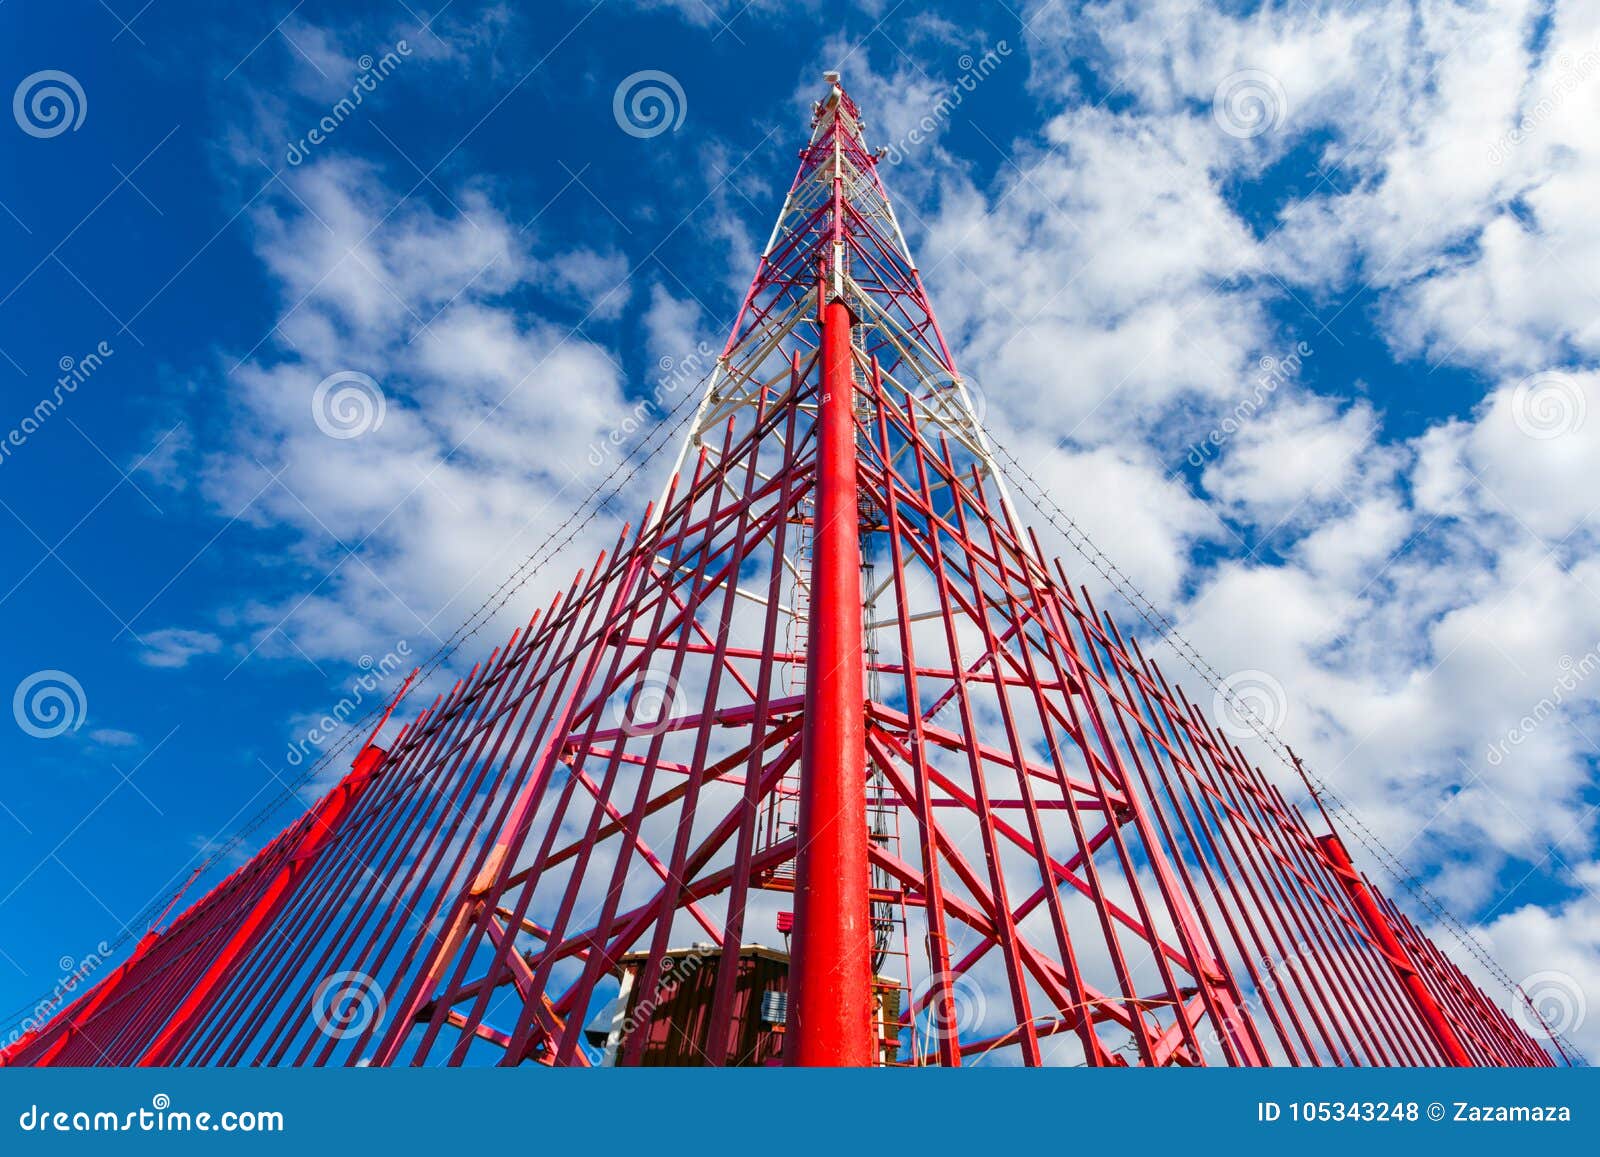 telecommunication tower with panel antennas and radio antennas and satellite dishes for mobile communications 2g, 3g, 4g, 5g